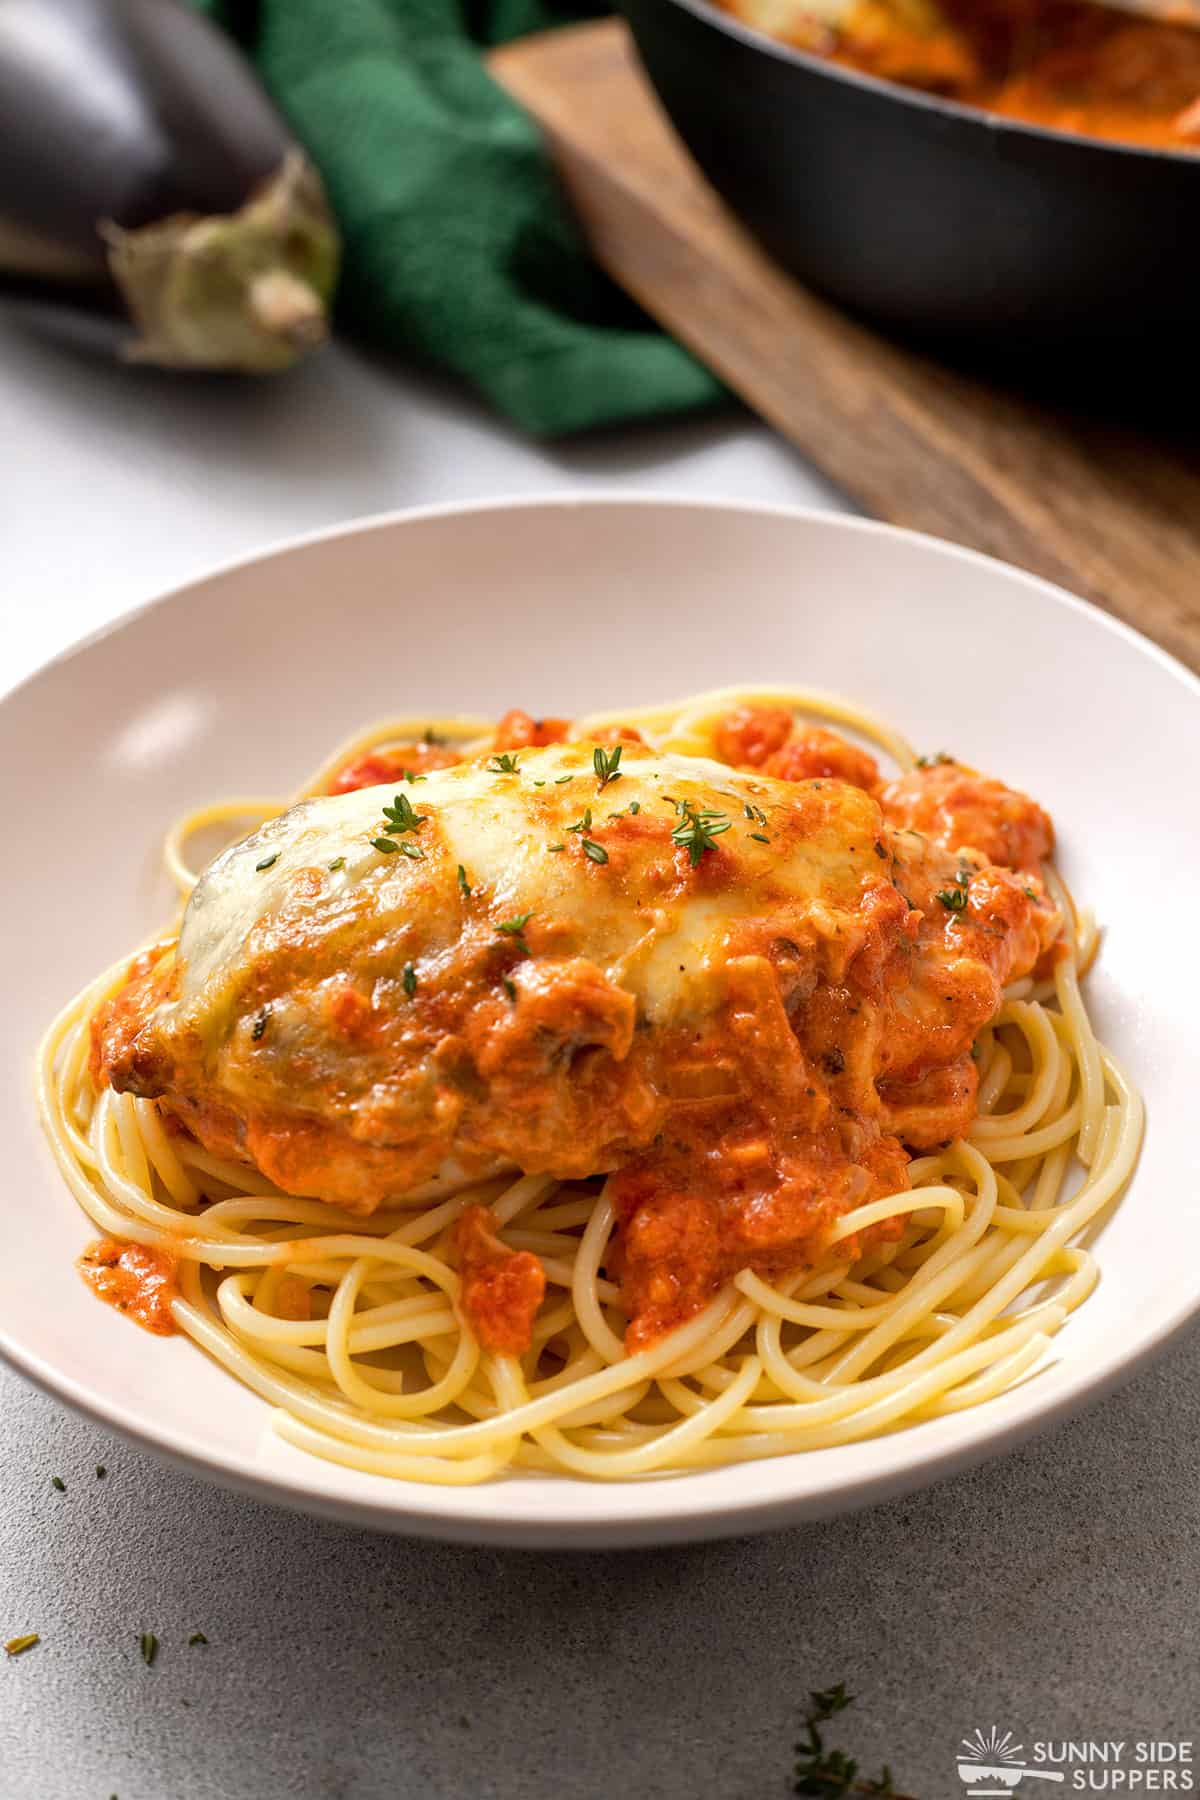 Chicken Sorrentino is served on a bed of spaghetti.